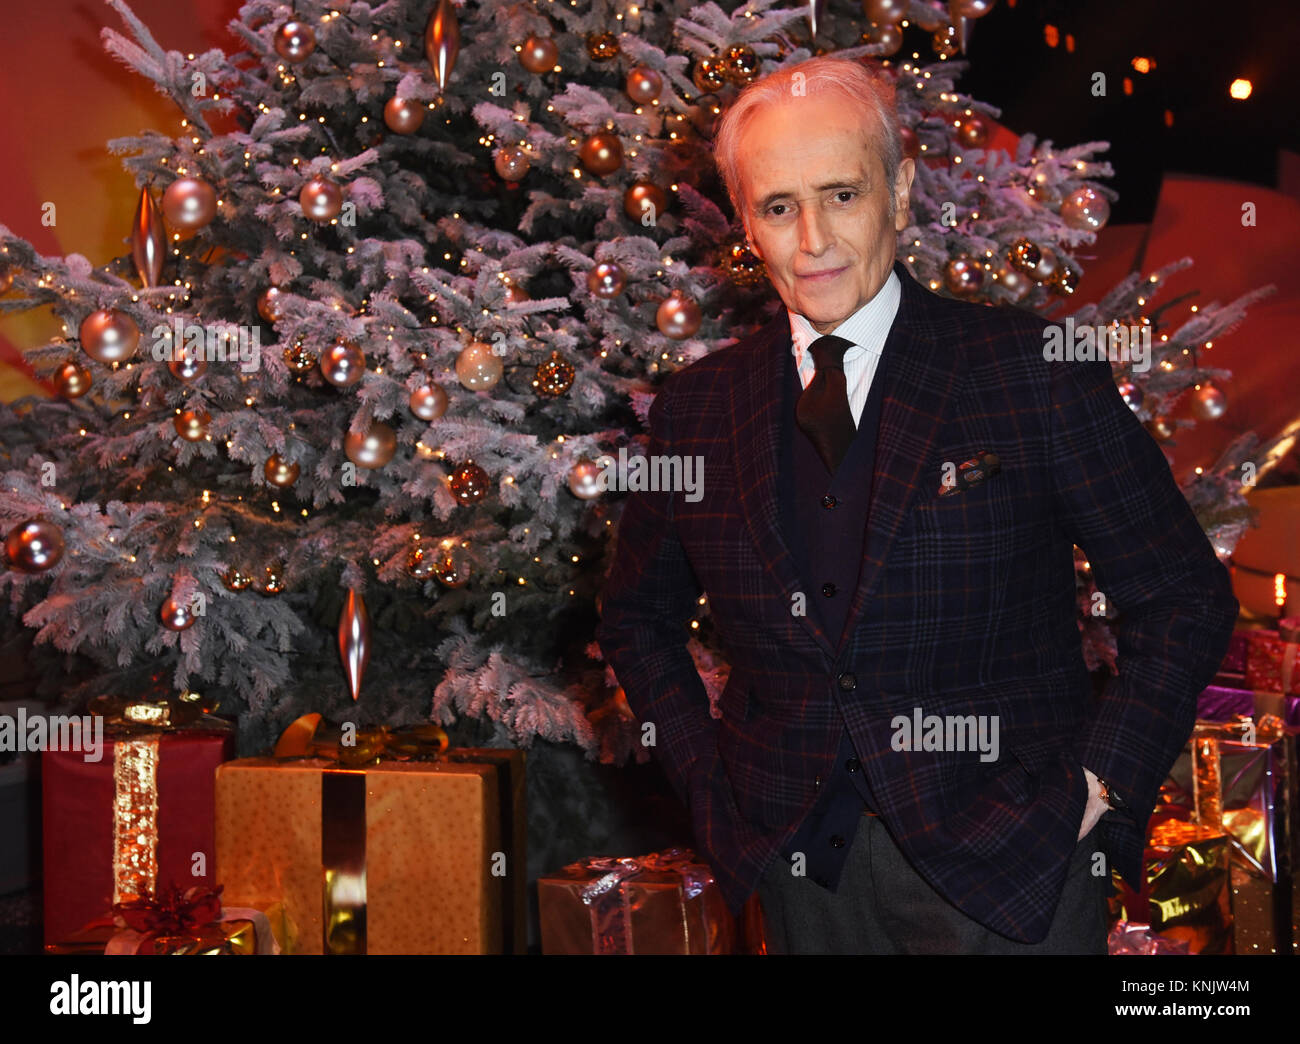 Munich, Germany. 12th Dec, 2017. Jose Carreras, spanish opera singer and founder of the 'José Carreras Leukaemia Foundation' stands beside a Christmas tree during rehearsals for the 'Jose Carreras Gala' in the Bavaria Studios in Munich, Germany, 12 December 2017. The gala is taking place on 14 December 2017. Credit: Ursula Düren/dpa/Alamy Live News Stock Photo